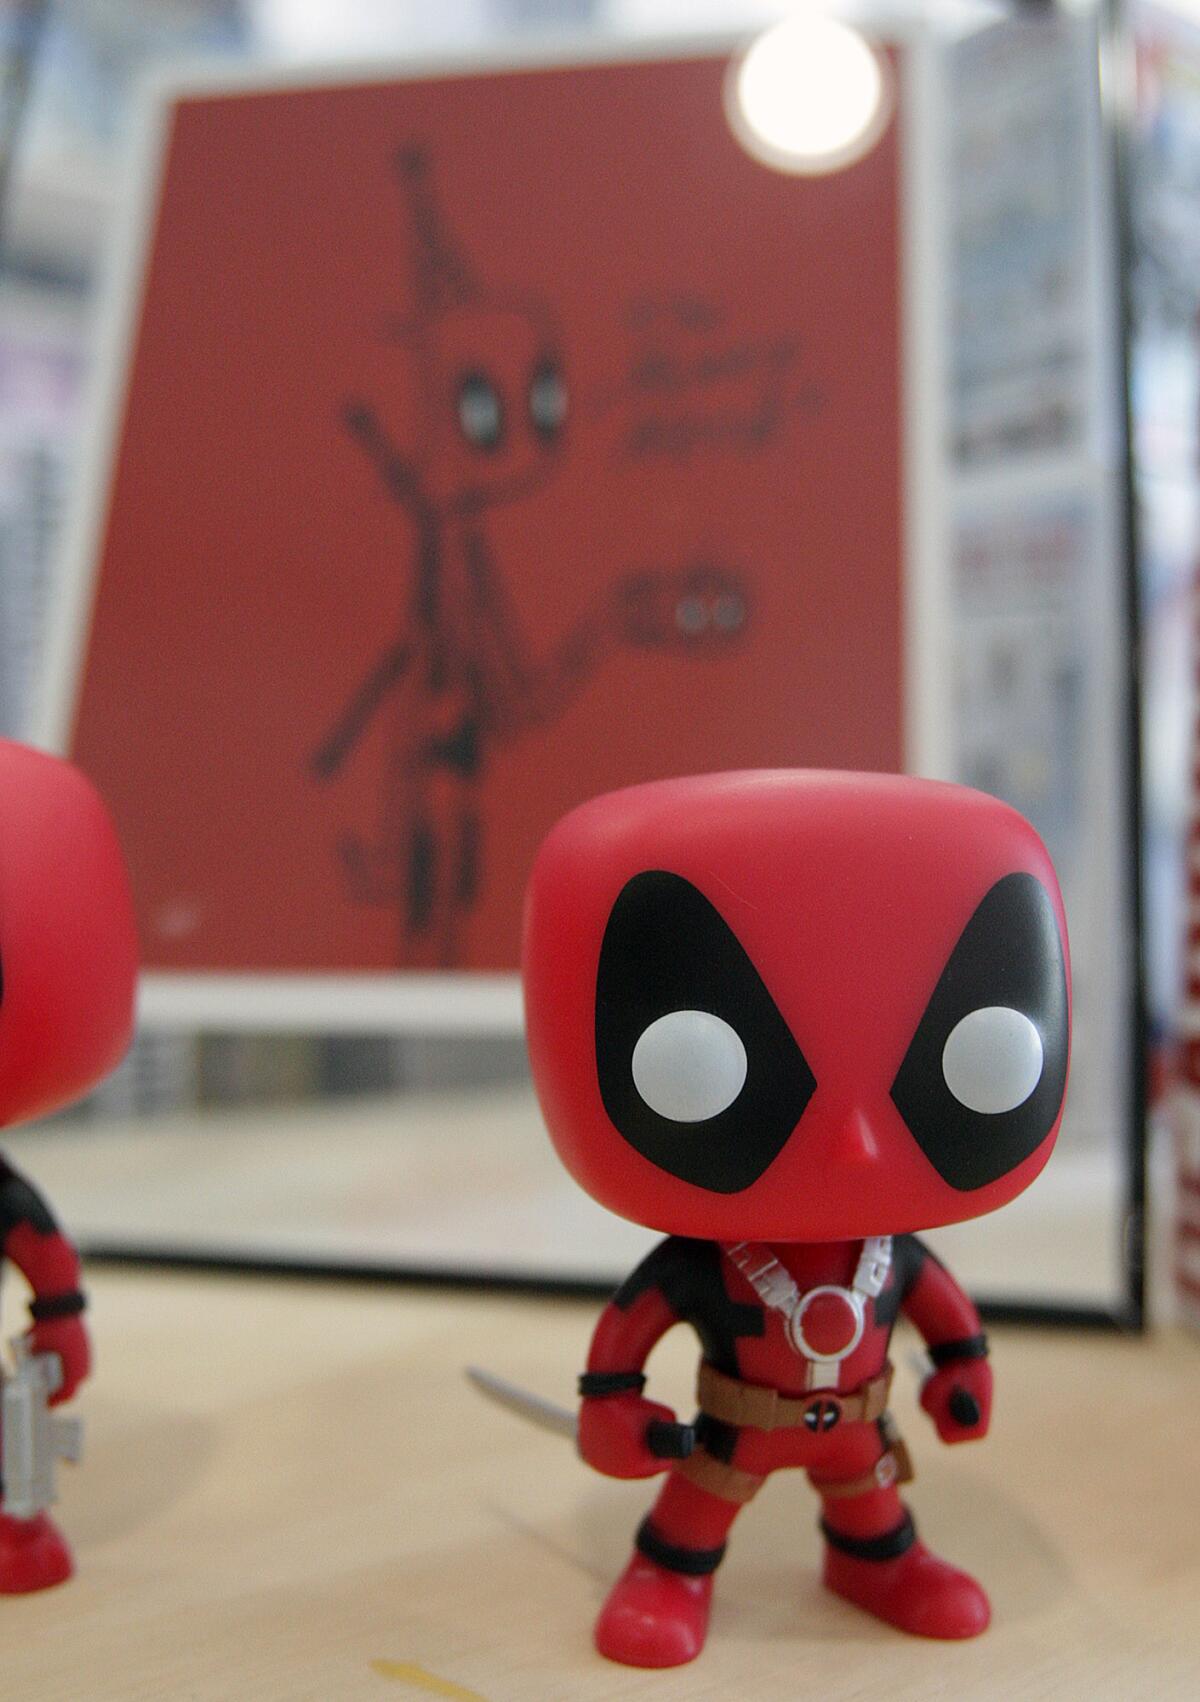 A Deadpool figure at The Perky Nerd, a 5-day old comic book and coffee store in Burbank on Thursday, April 28, 2016.